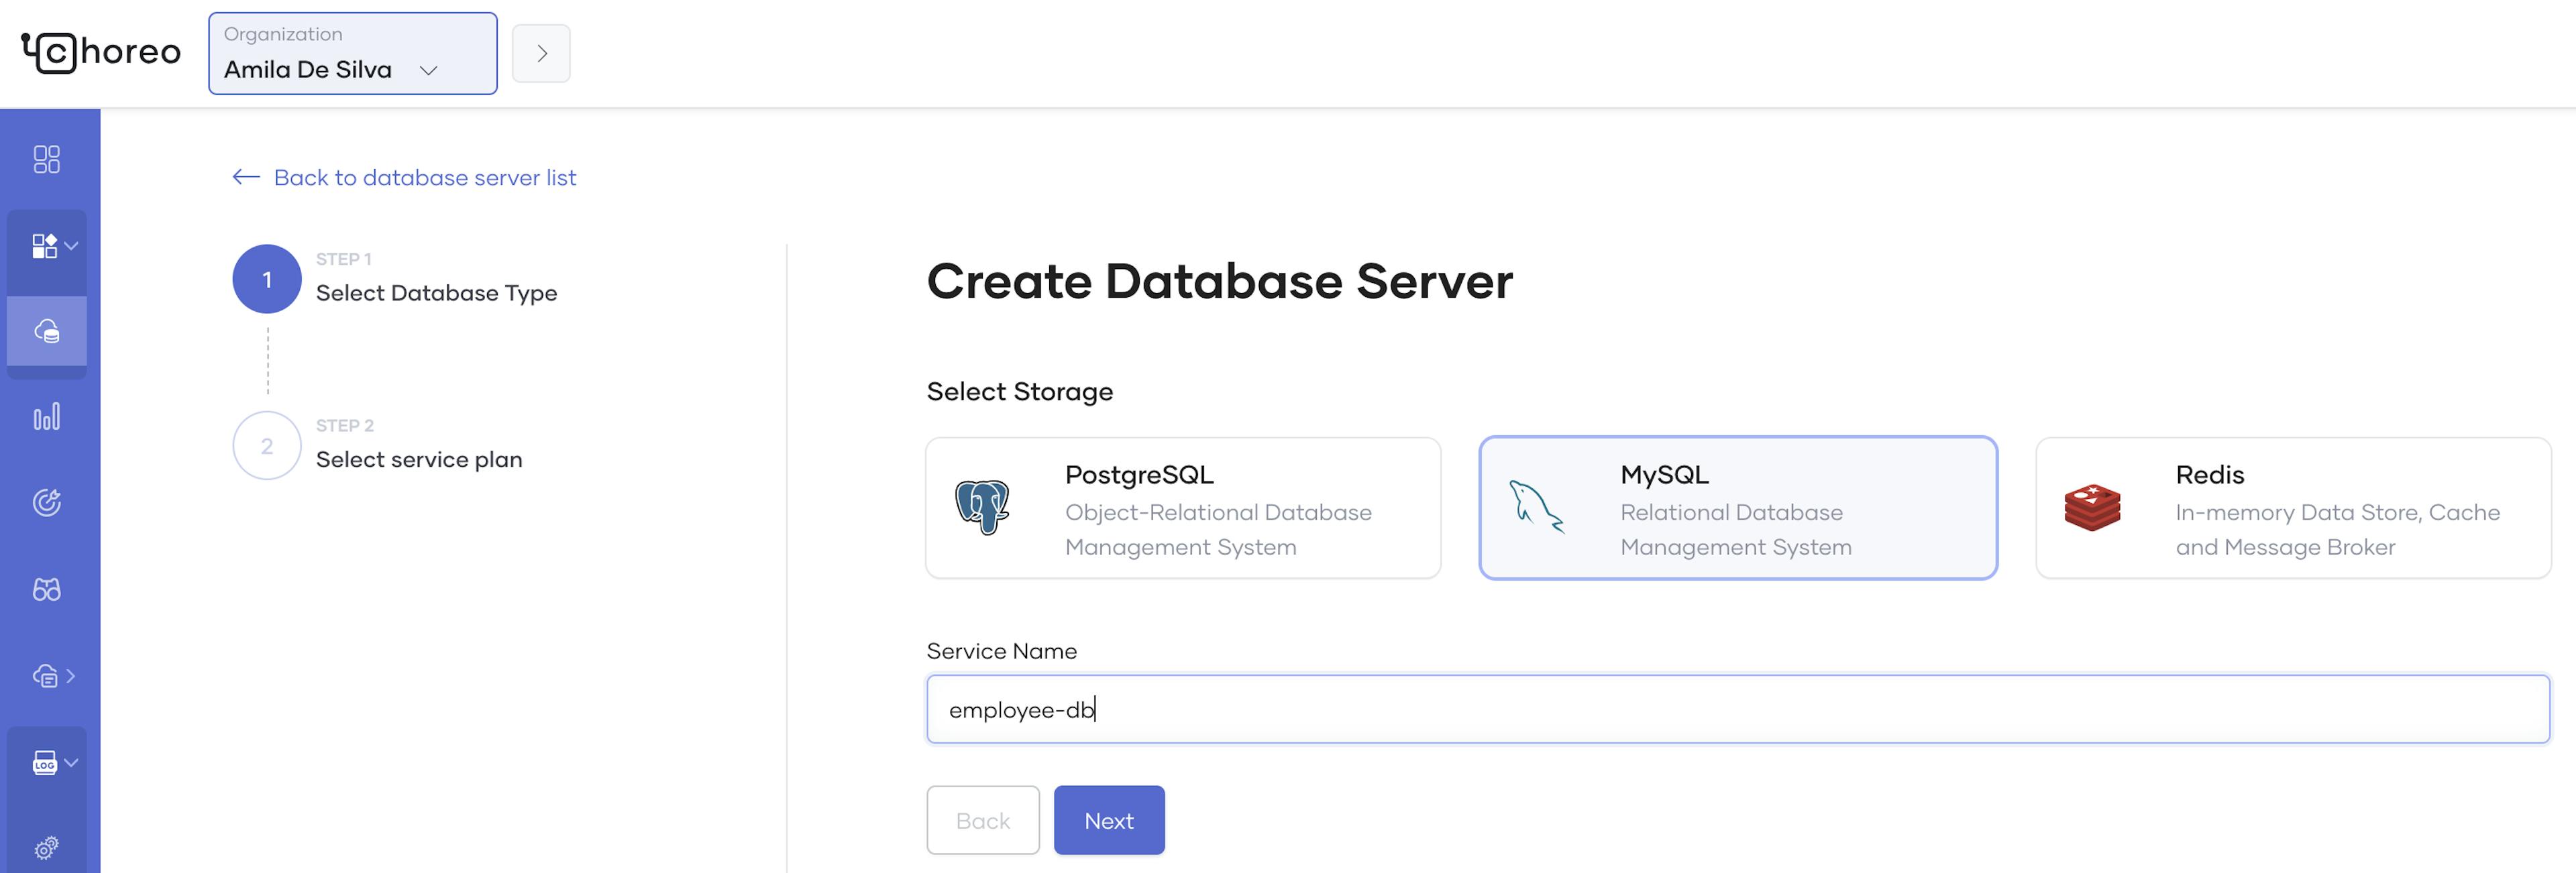 Database create wizard - Specify DB name